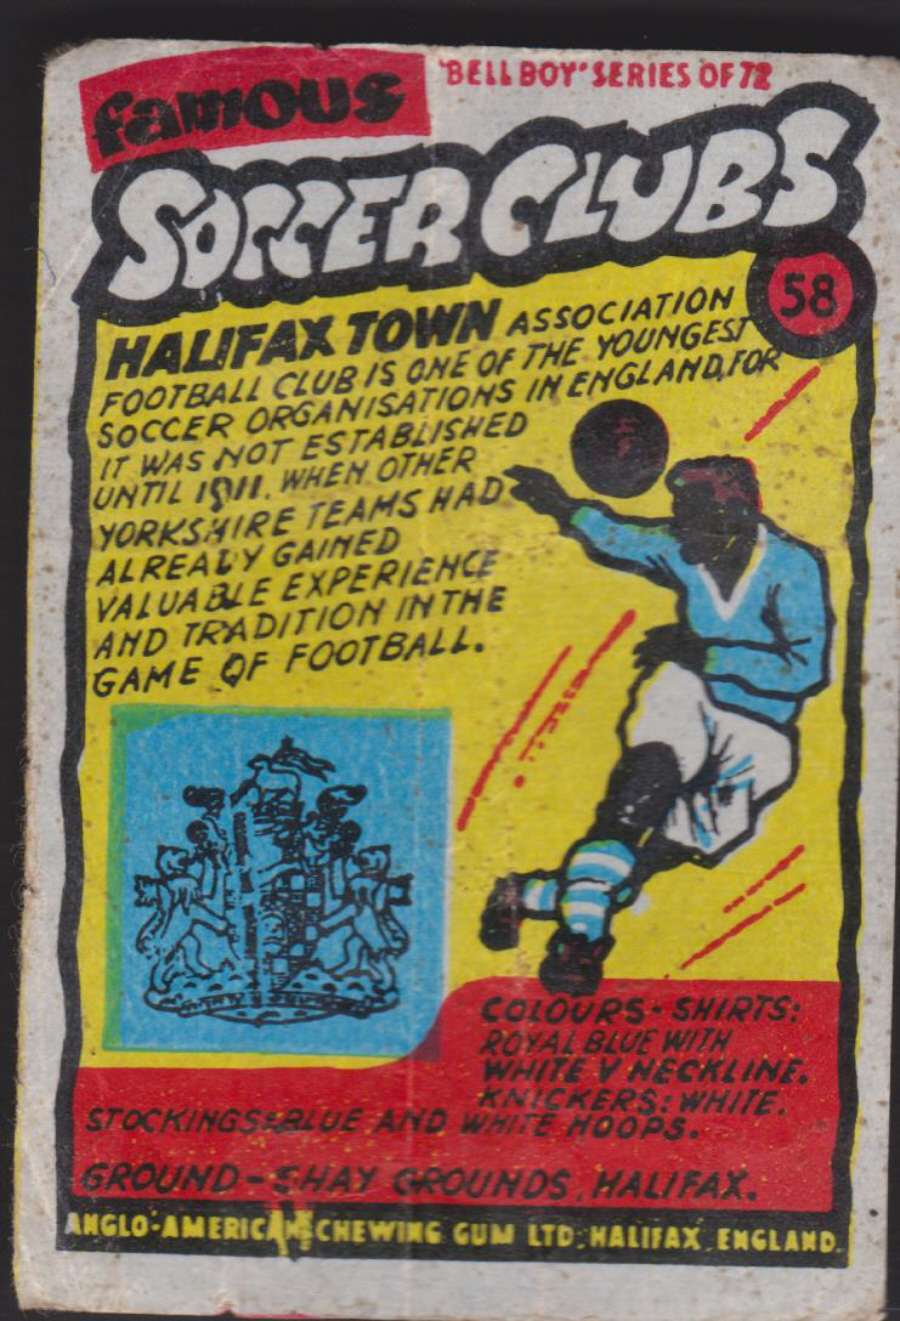 Anglo-American-Chewing-Gum-Wax-Wrapper-Famous-Soccer-Clubs-No-58 -Halifax Town